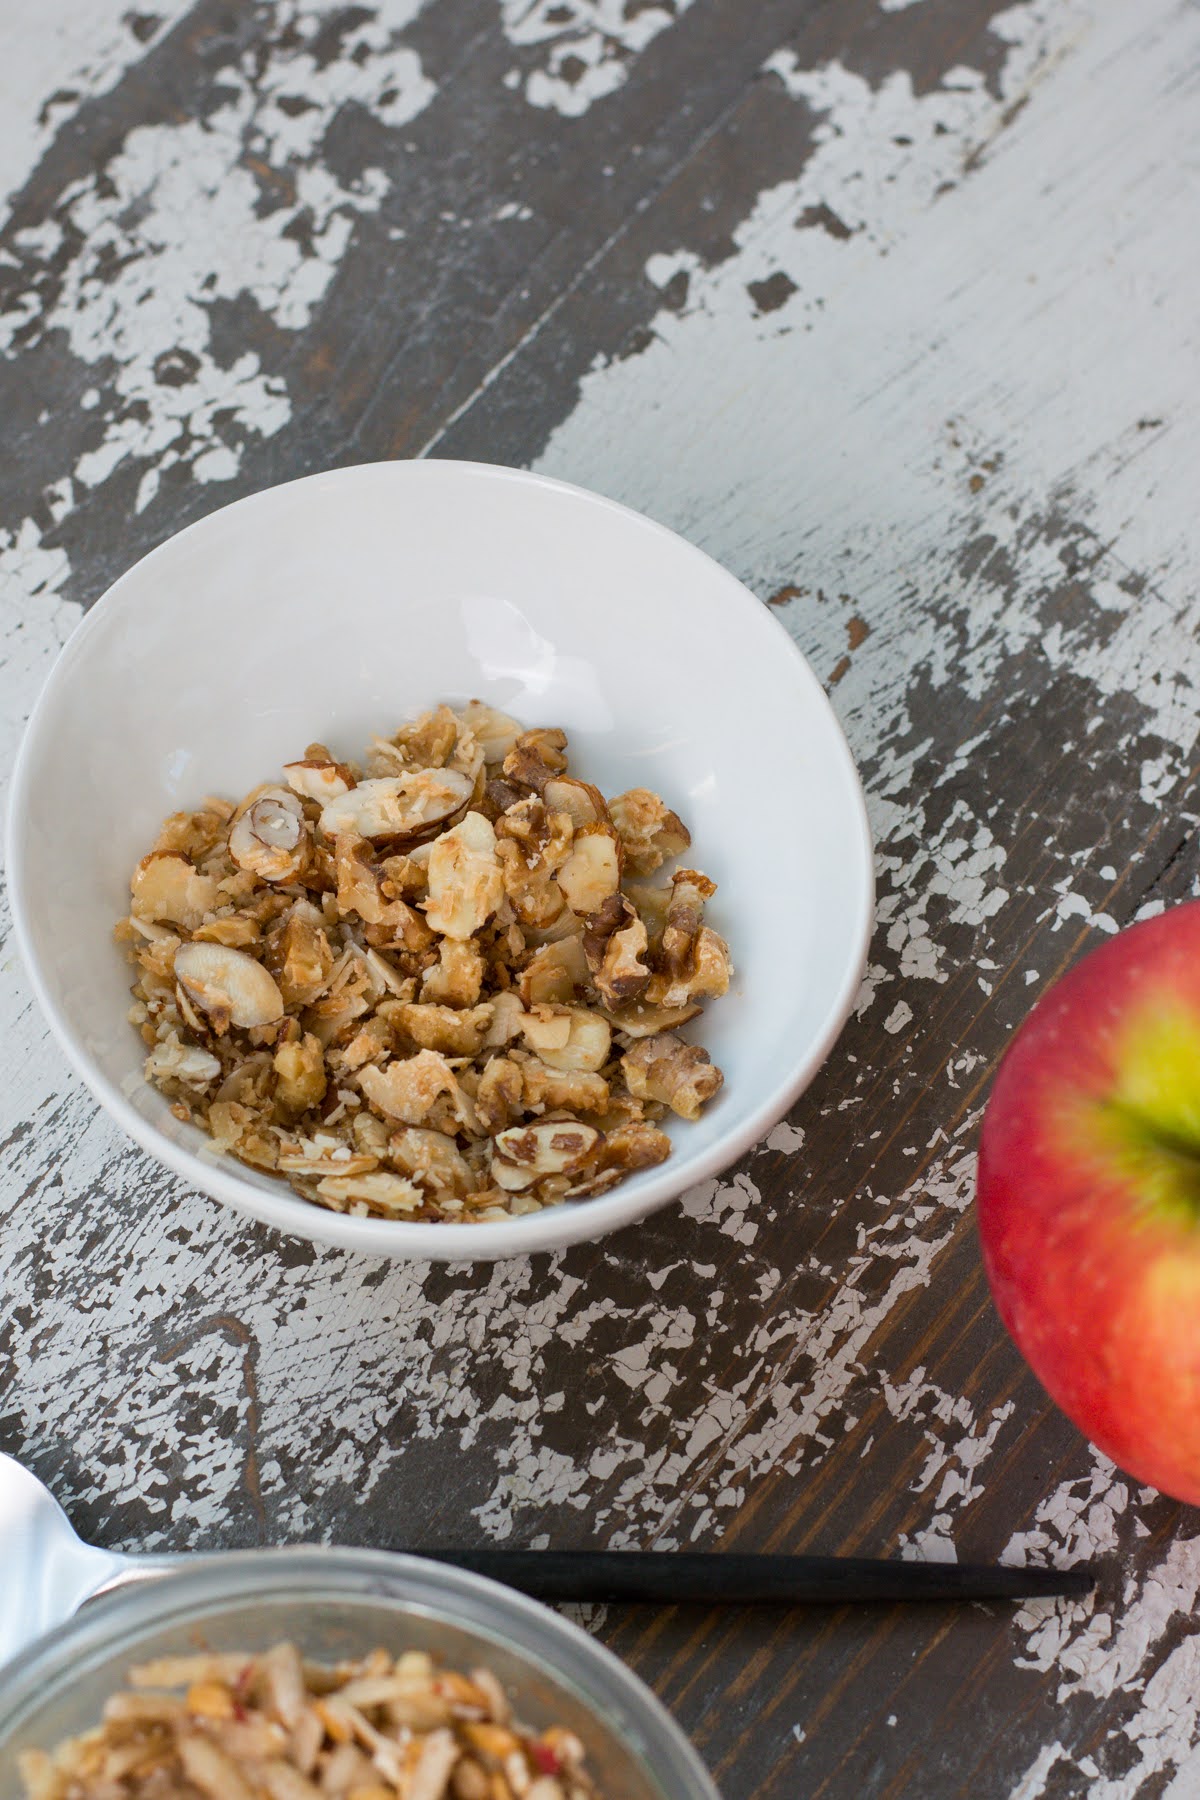 The crisp topping in a small bowl beside a fresh apple